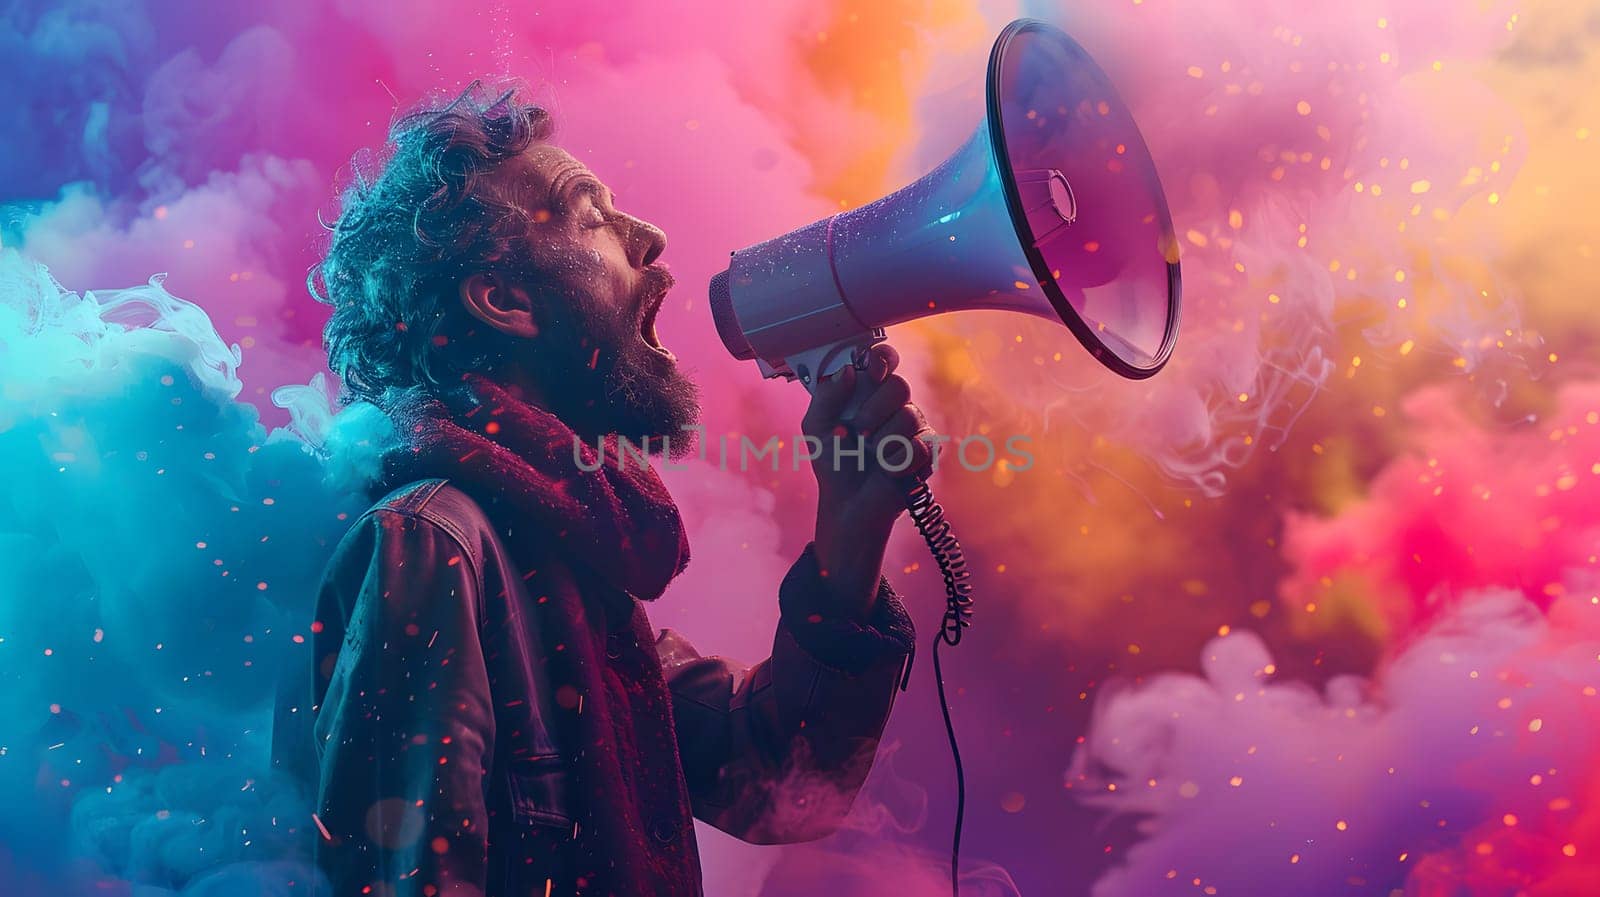 Music artist holding a microphone on a colorful background by Nadtochiy